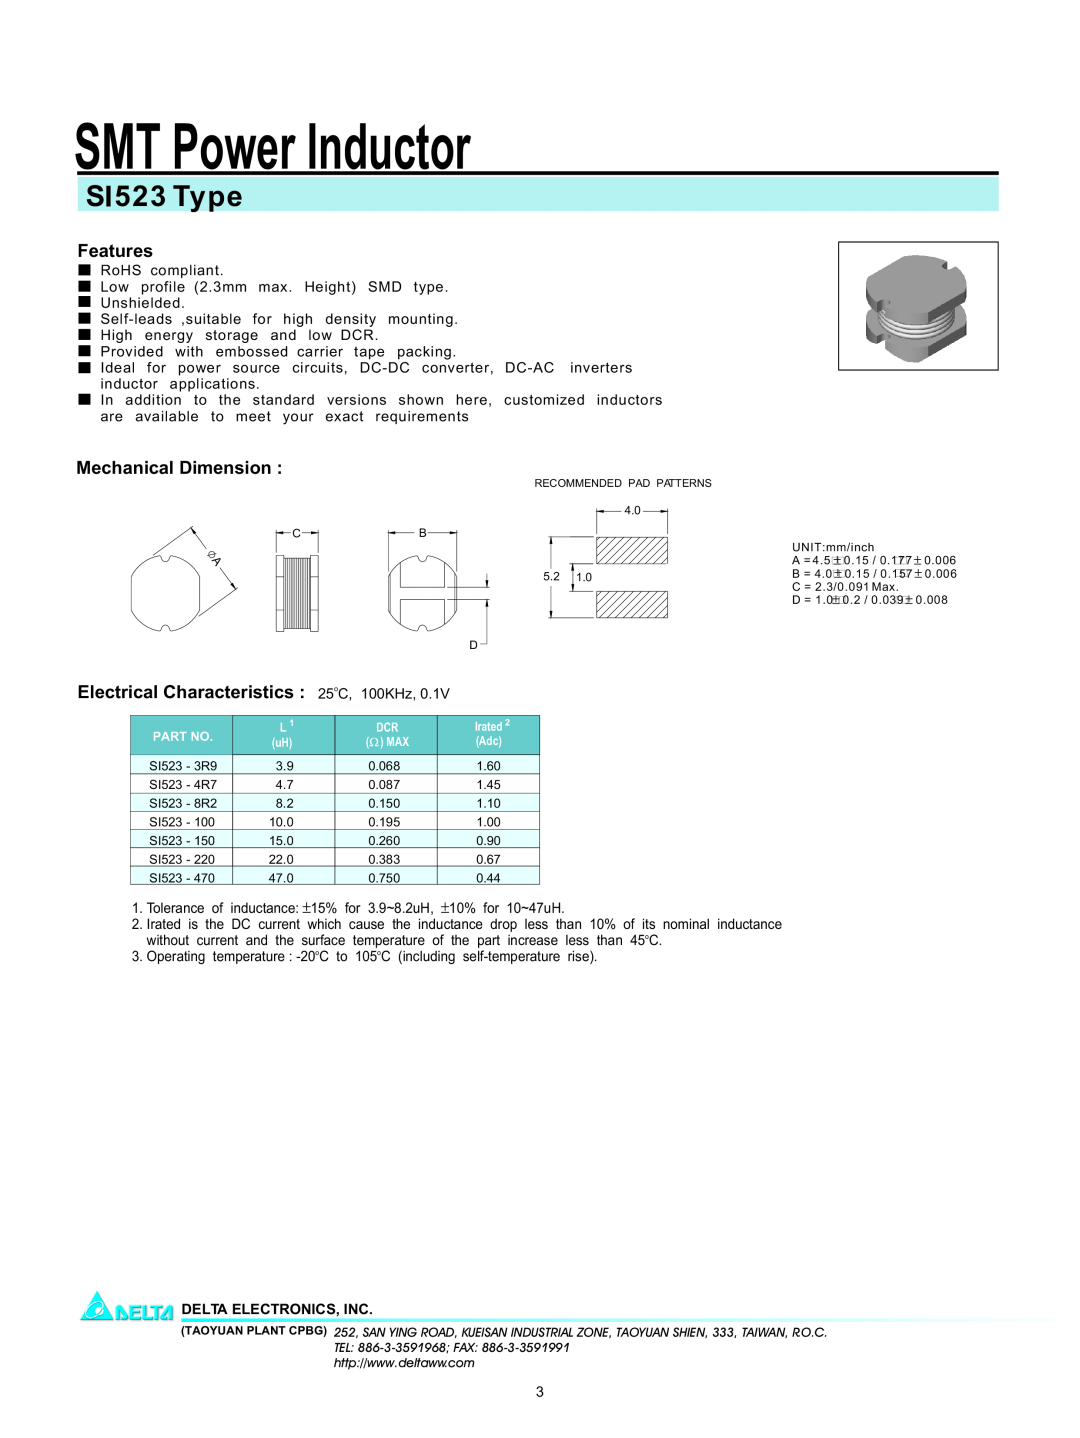 Delta Electronics S 523 manual SMT Power Inductor, SI523 Type, Features, Mechanical Dimension, Delta Electronics, Inc 